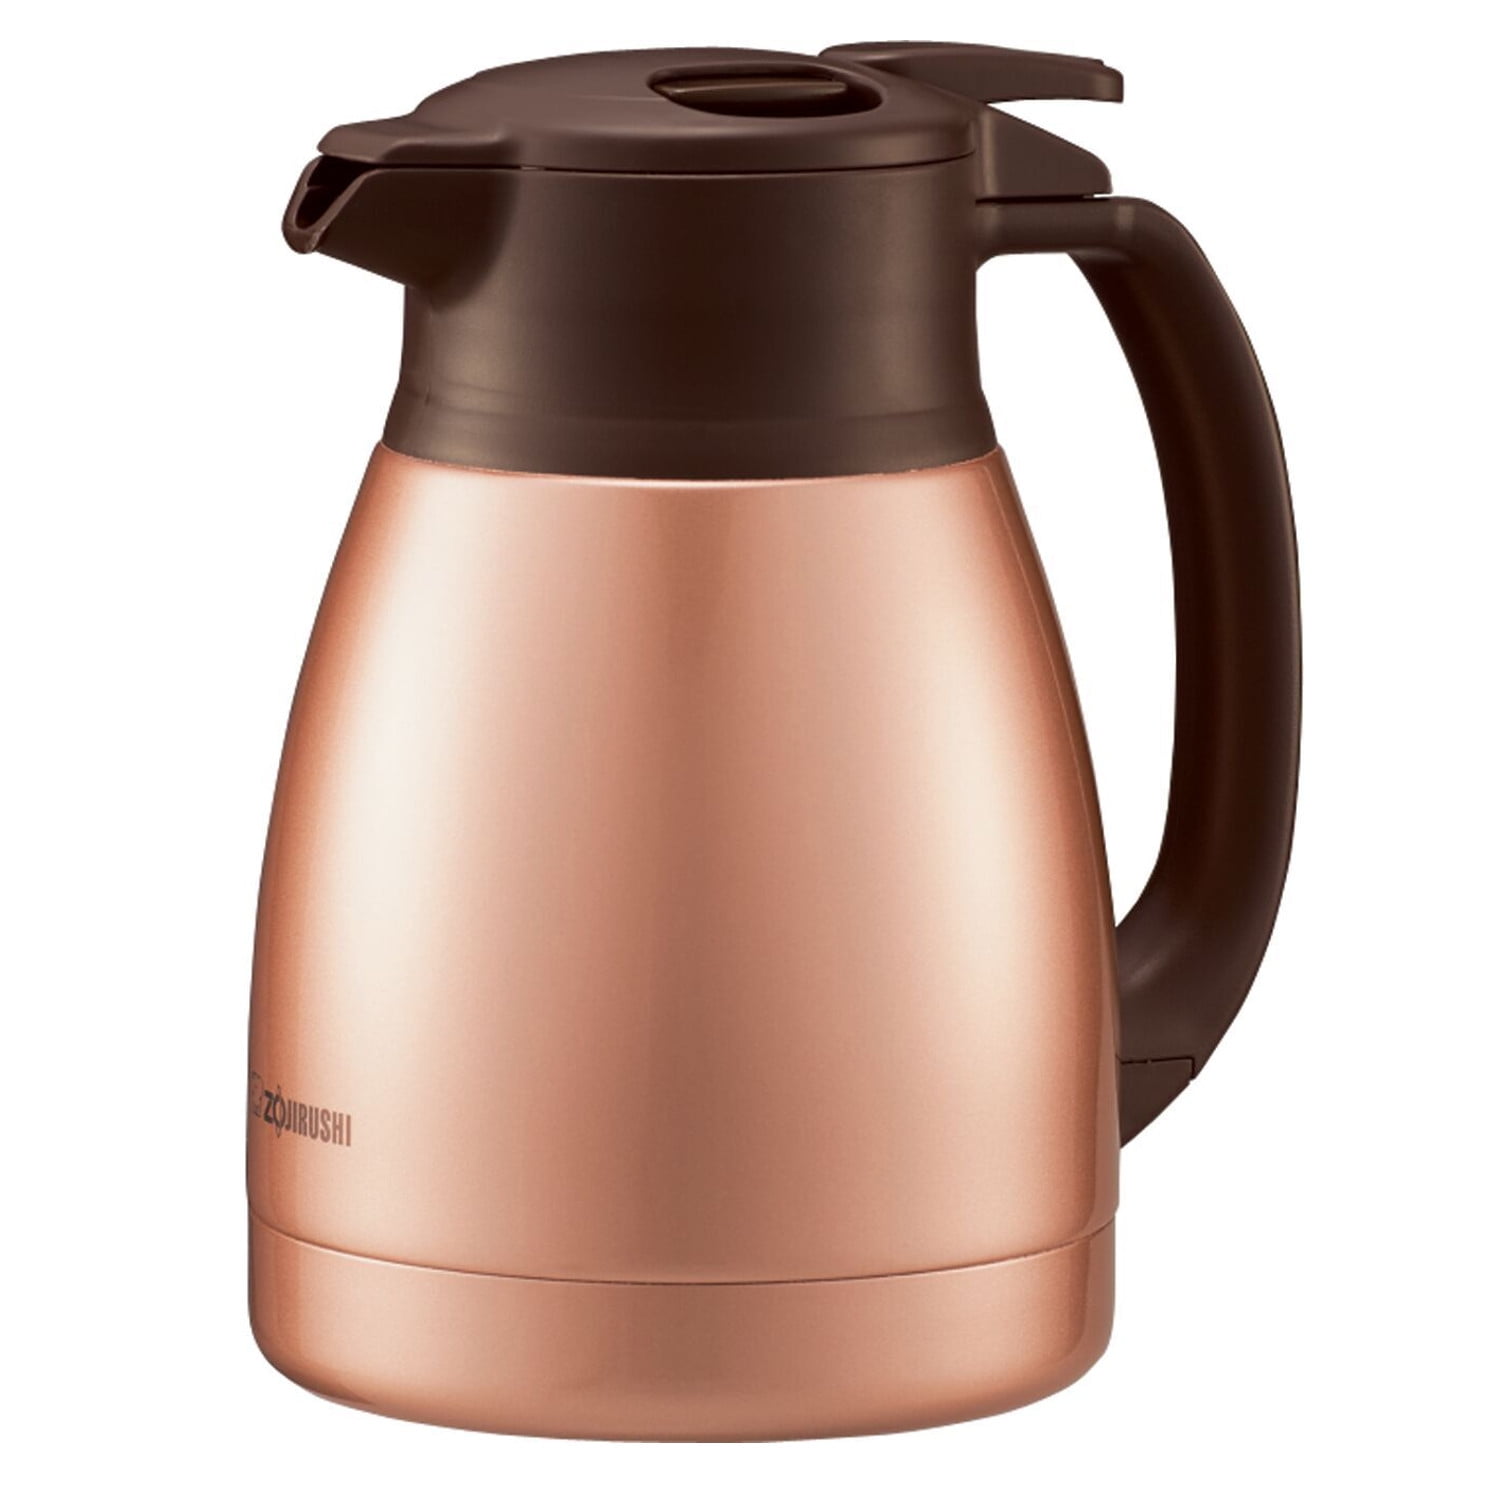 Zojirushi Electric Kettle 1.0L Thermos CK-AW10-TM from japan 